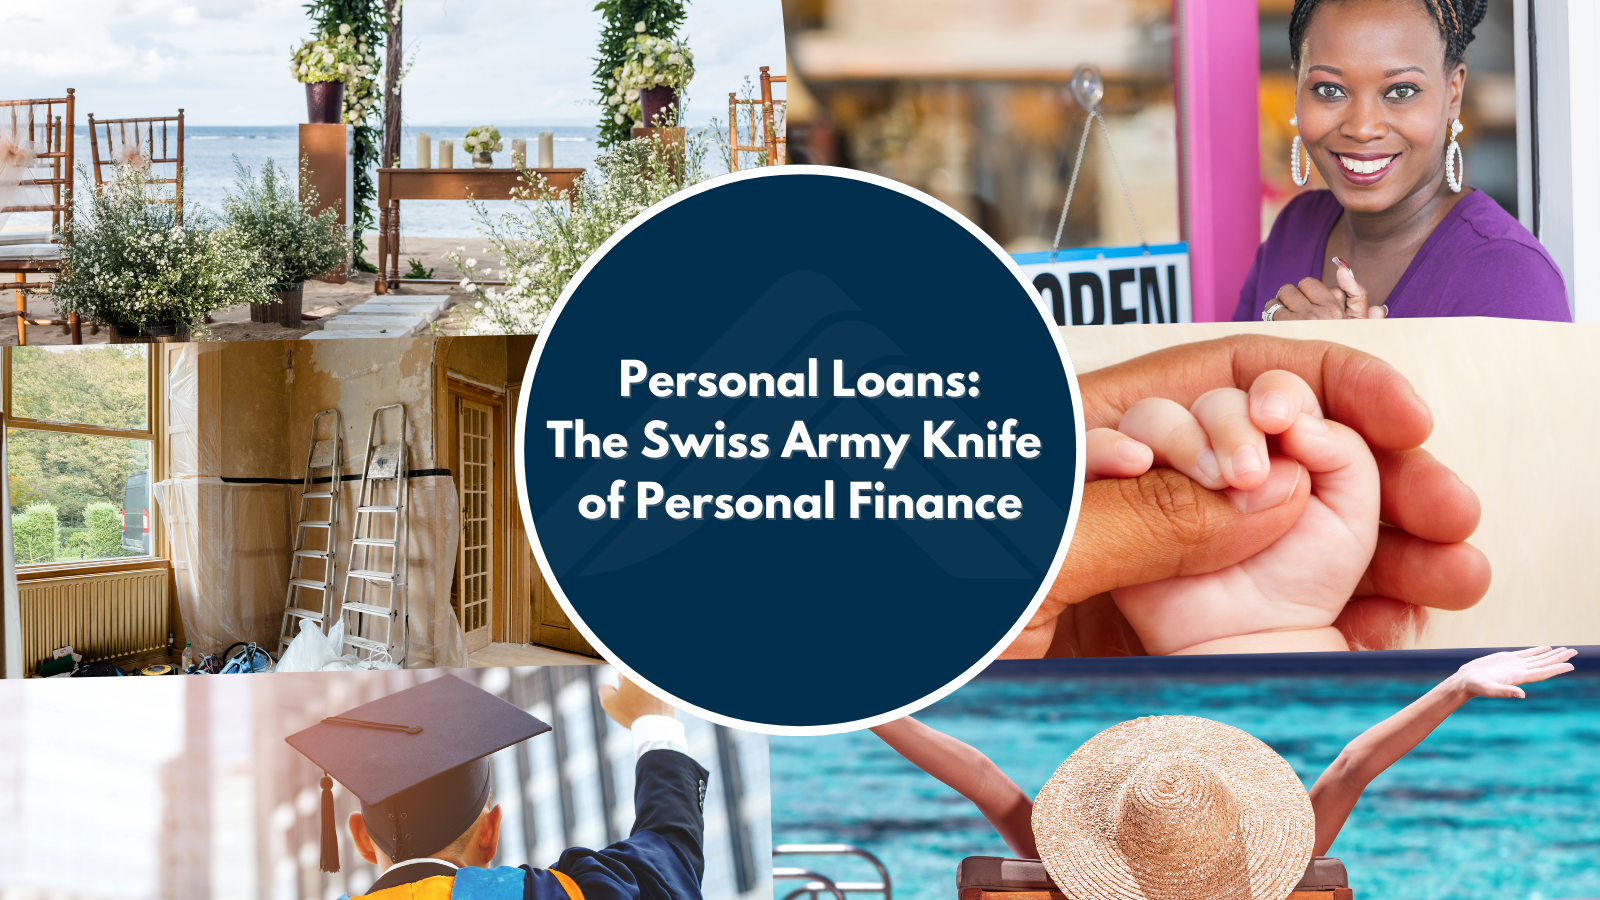 Personal Loans- The Swiss Army Knife of Personal Finance